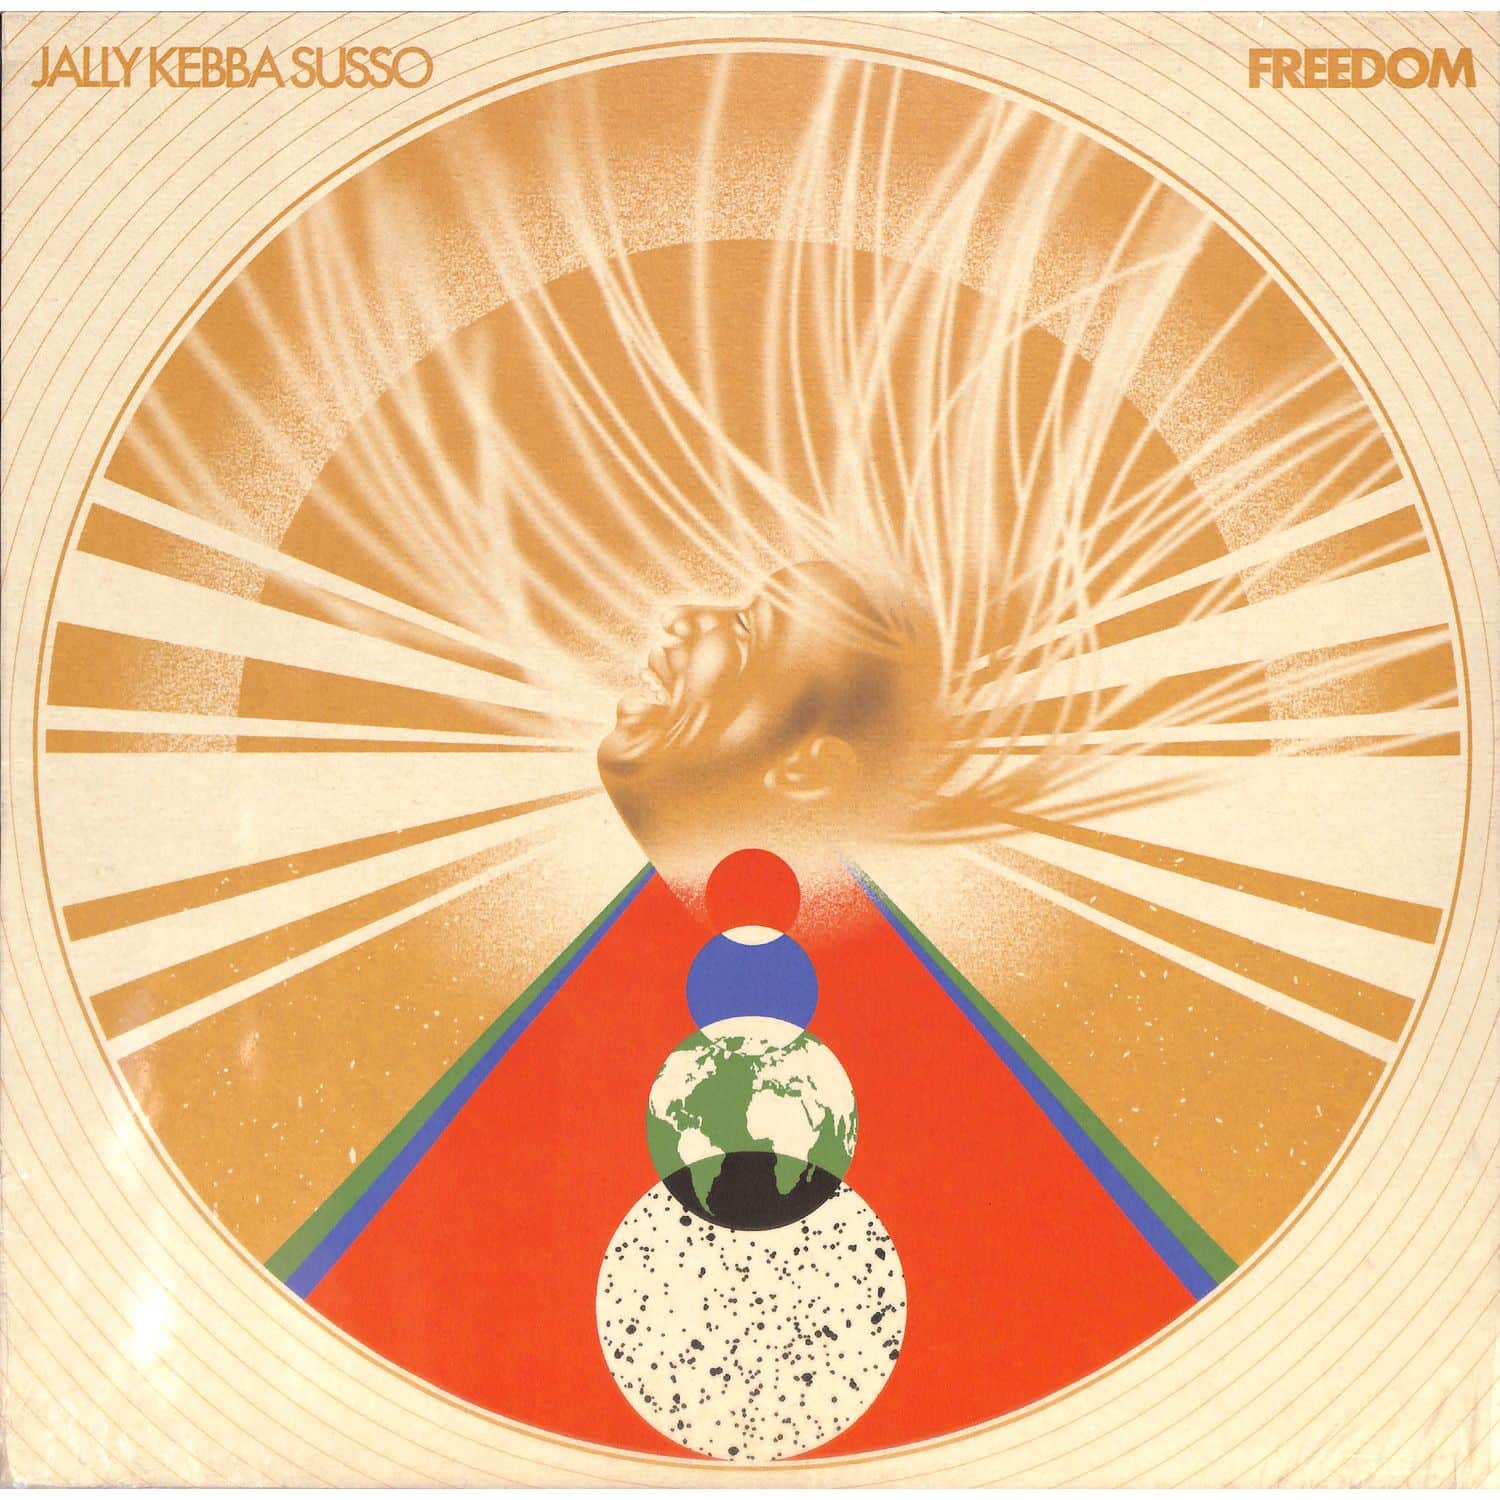 Jally Kebba Susso - FREEDOM